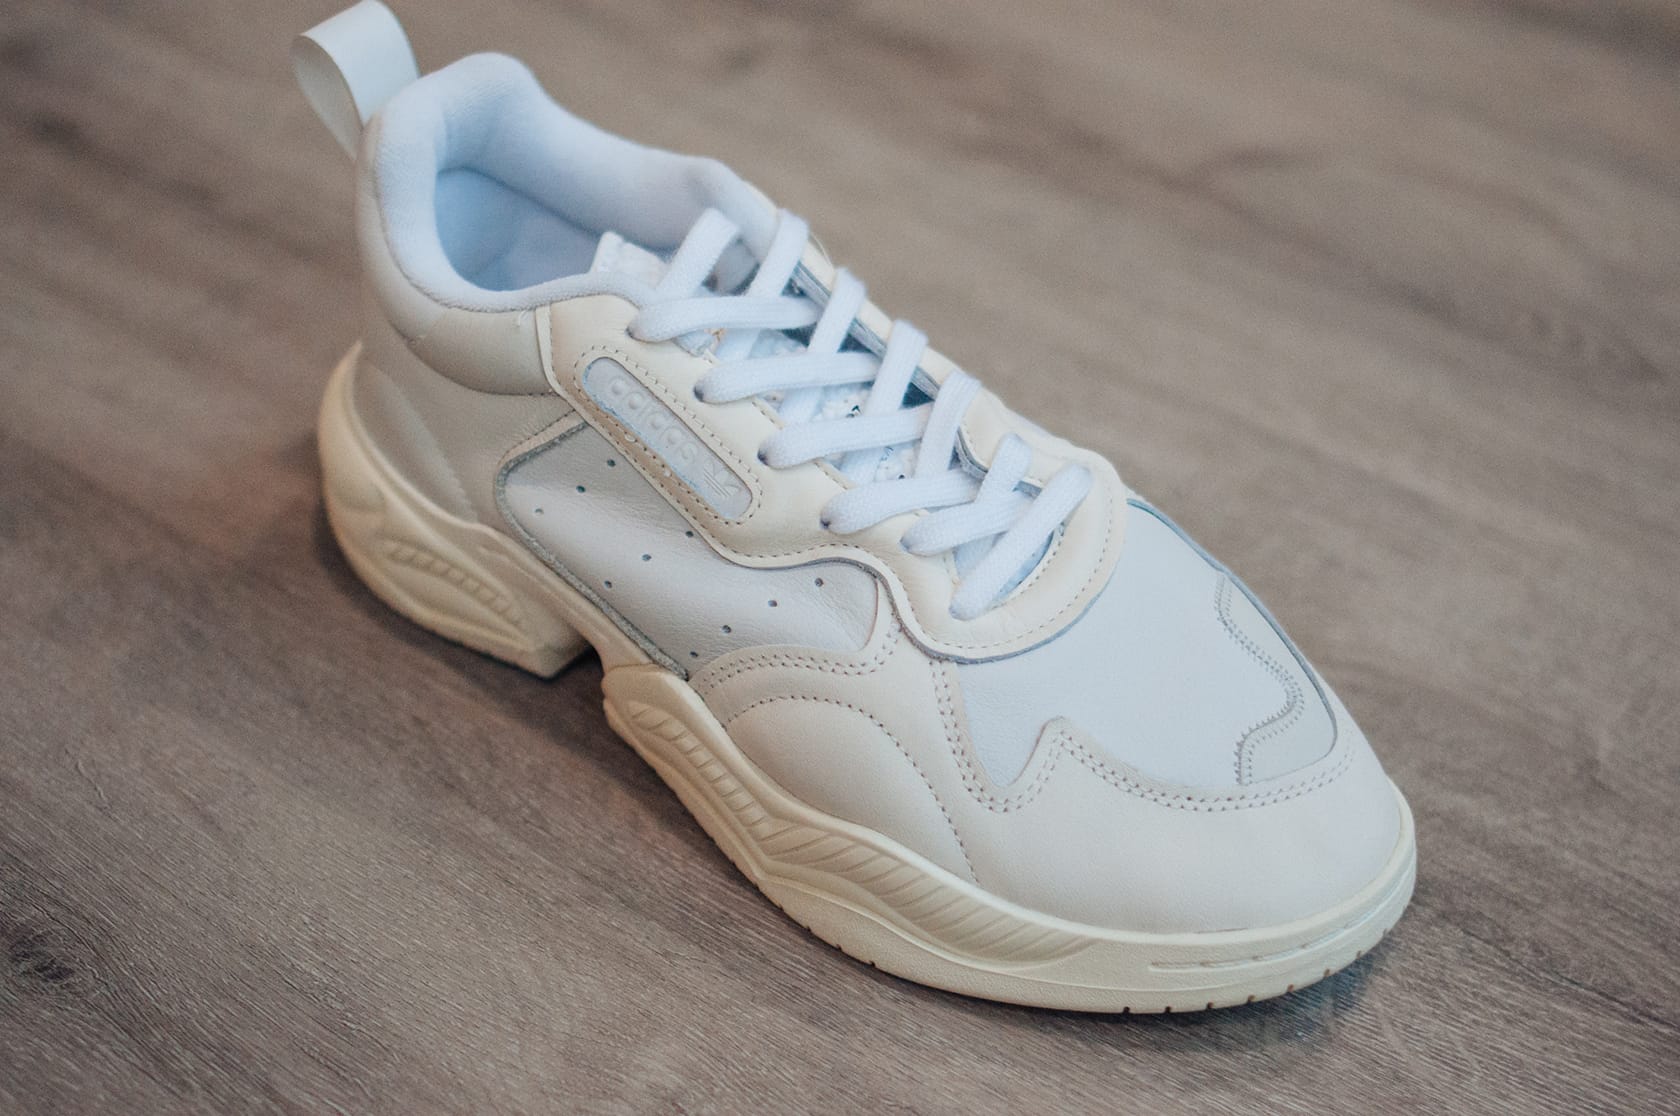 adidas originals continental 80 trainers in white x home of classics